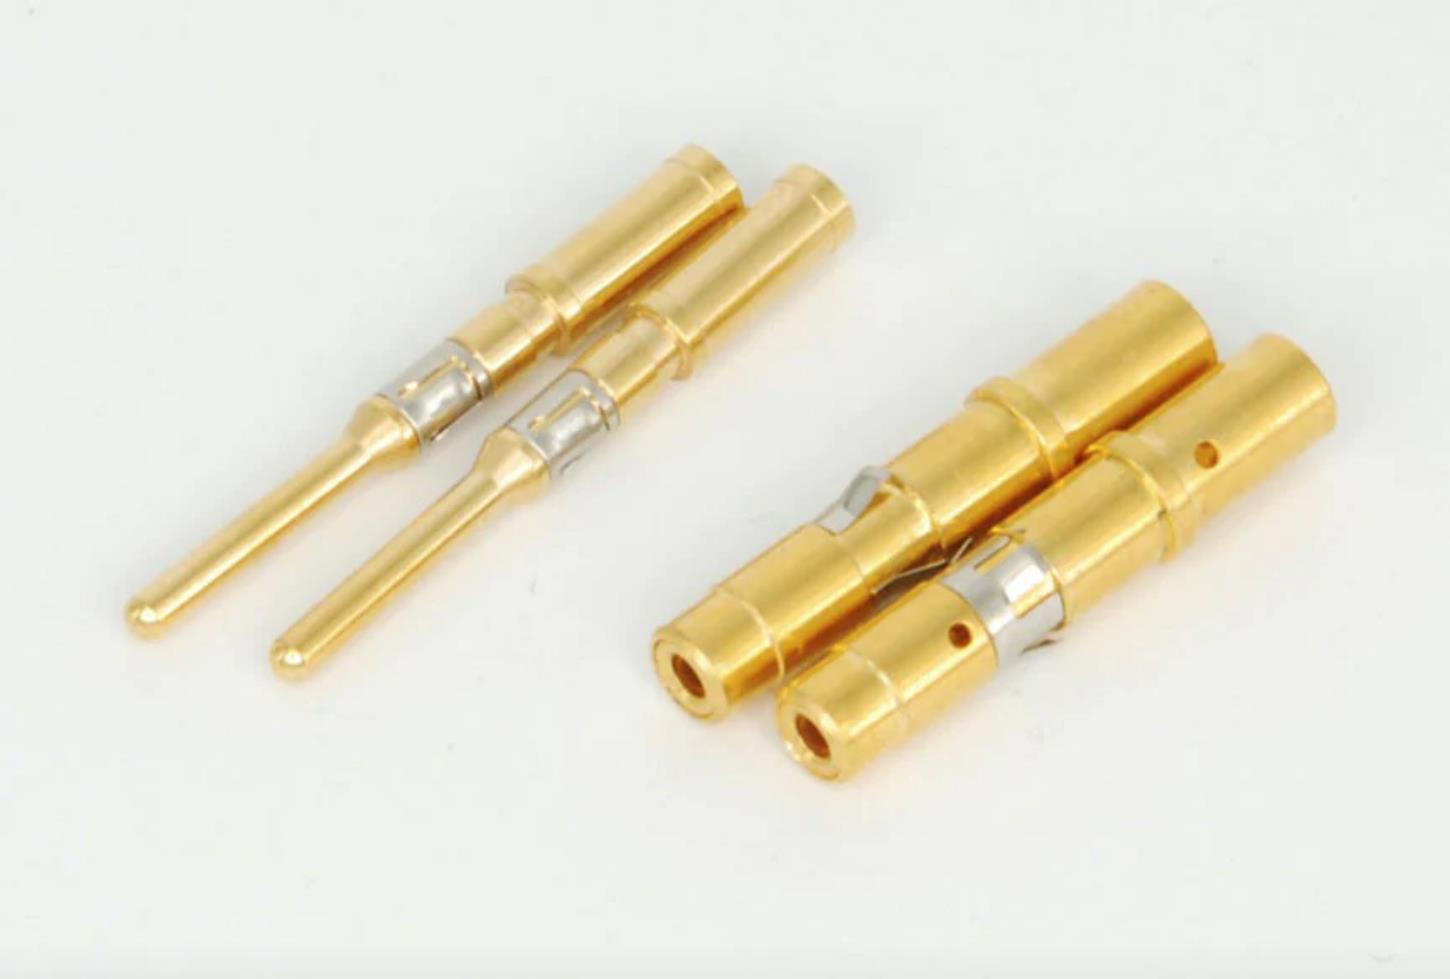 Military connector metal contact gold plated male and female connector terminals